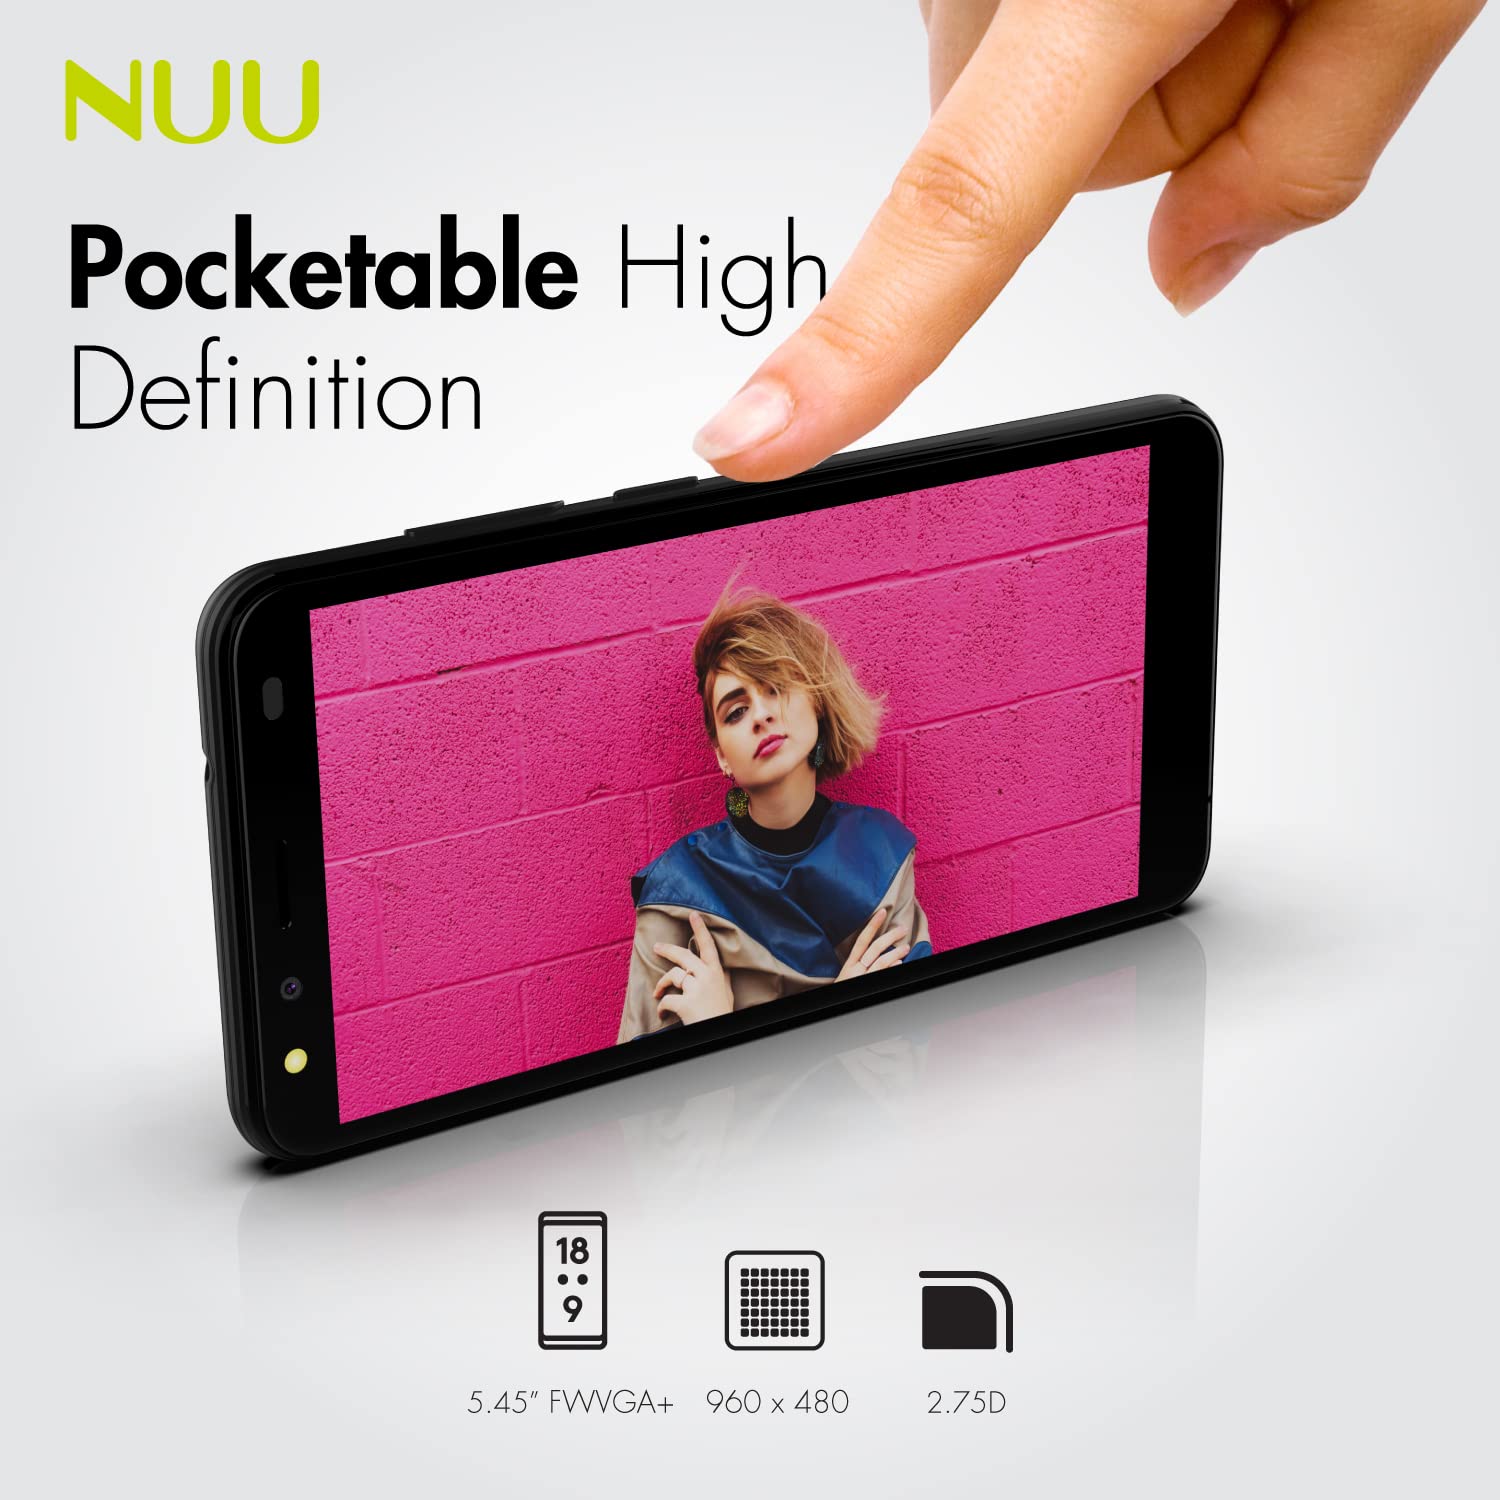 NUU A11L | Unlocked 4G LTE Smartphone|5.45'' HD Display | 16GB + 2GB RAM | 2500 mAh Battery | Android 11 Go Edition | Compatible with Verizon and T-Mobile